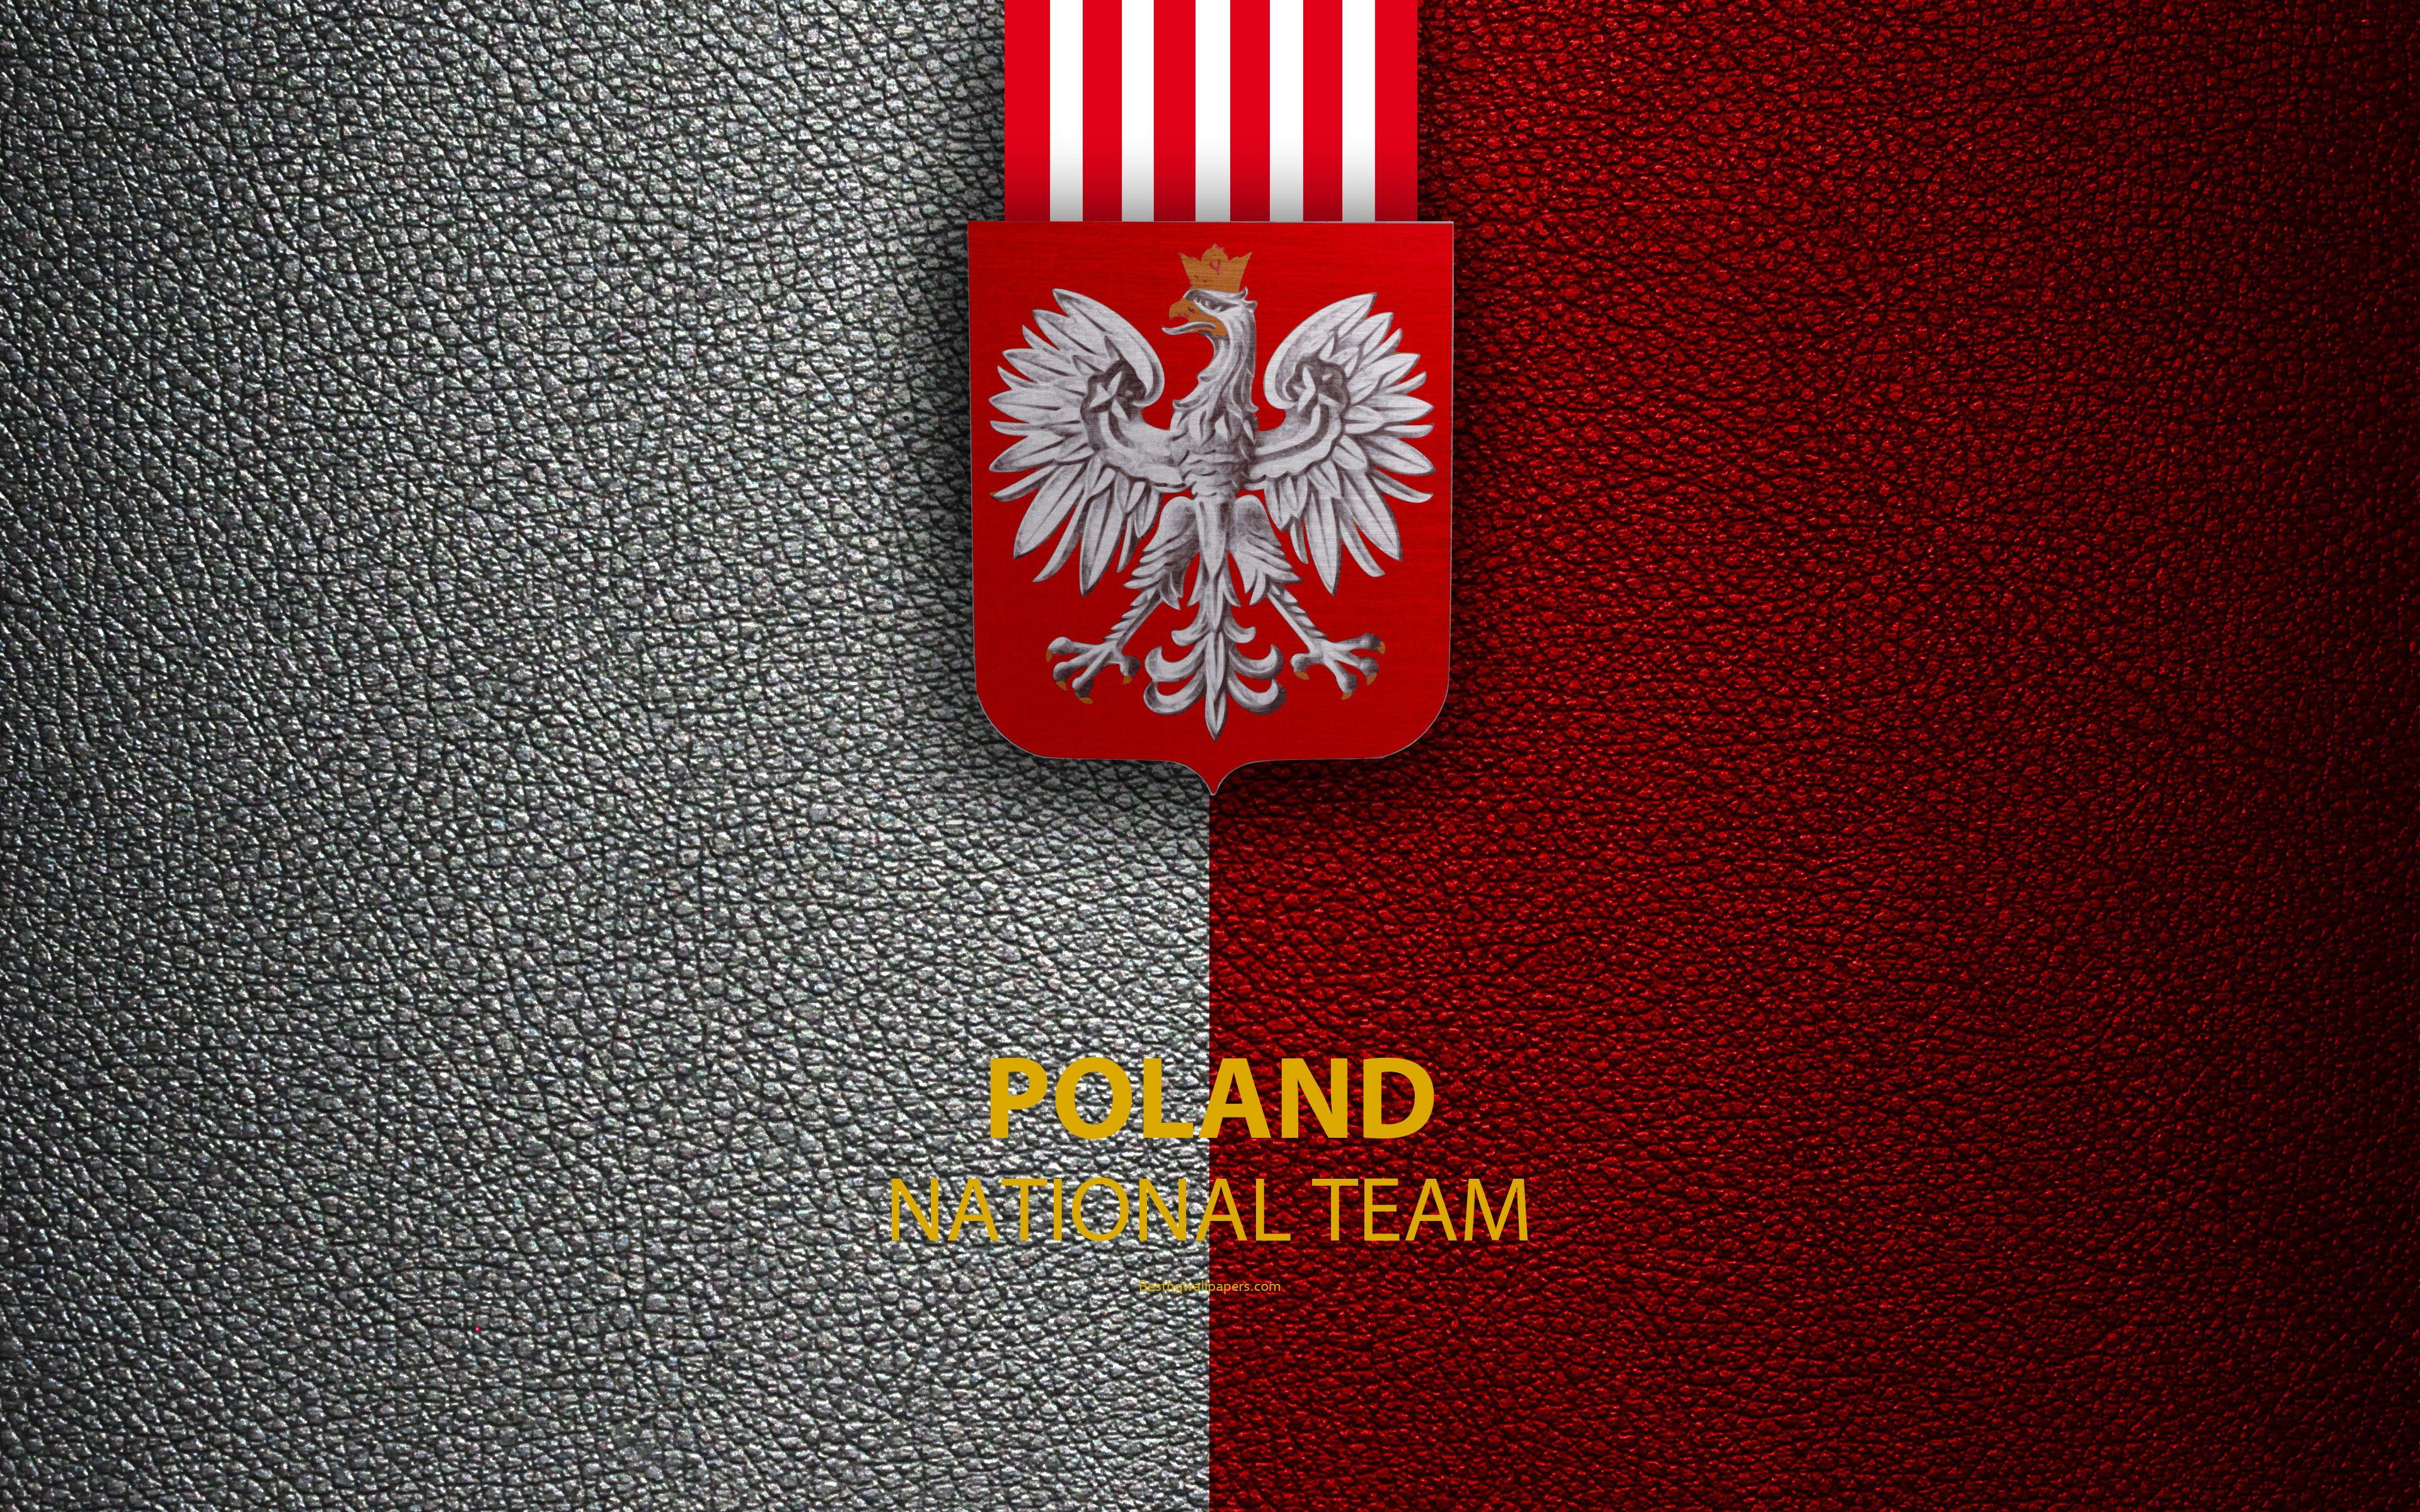 Download wallpaper Poland national football team, 4k, leather